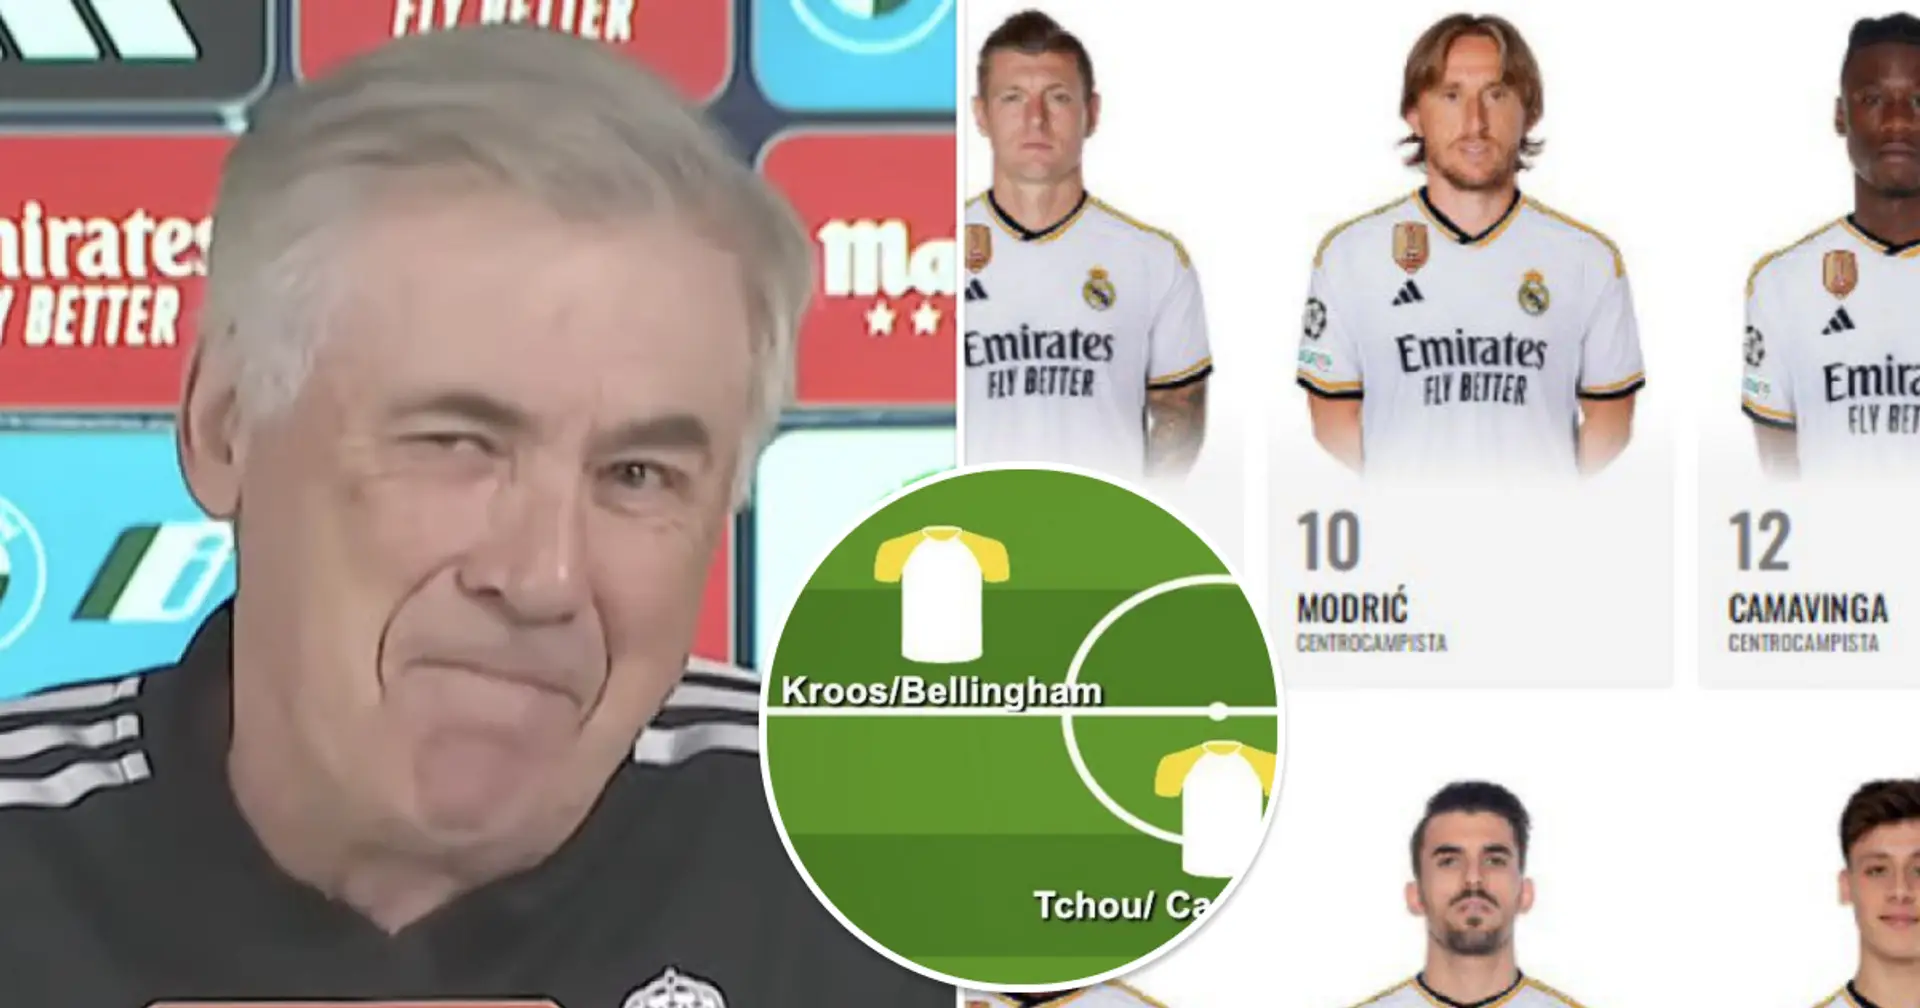 Real Madrid's crazy squad depth in midfield shown 